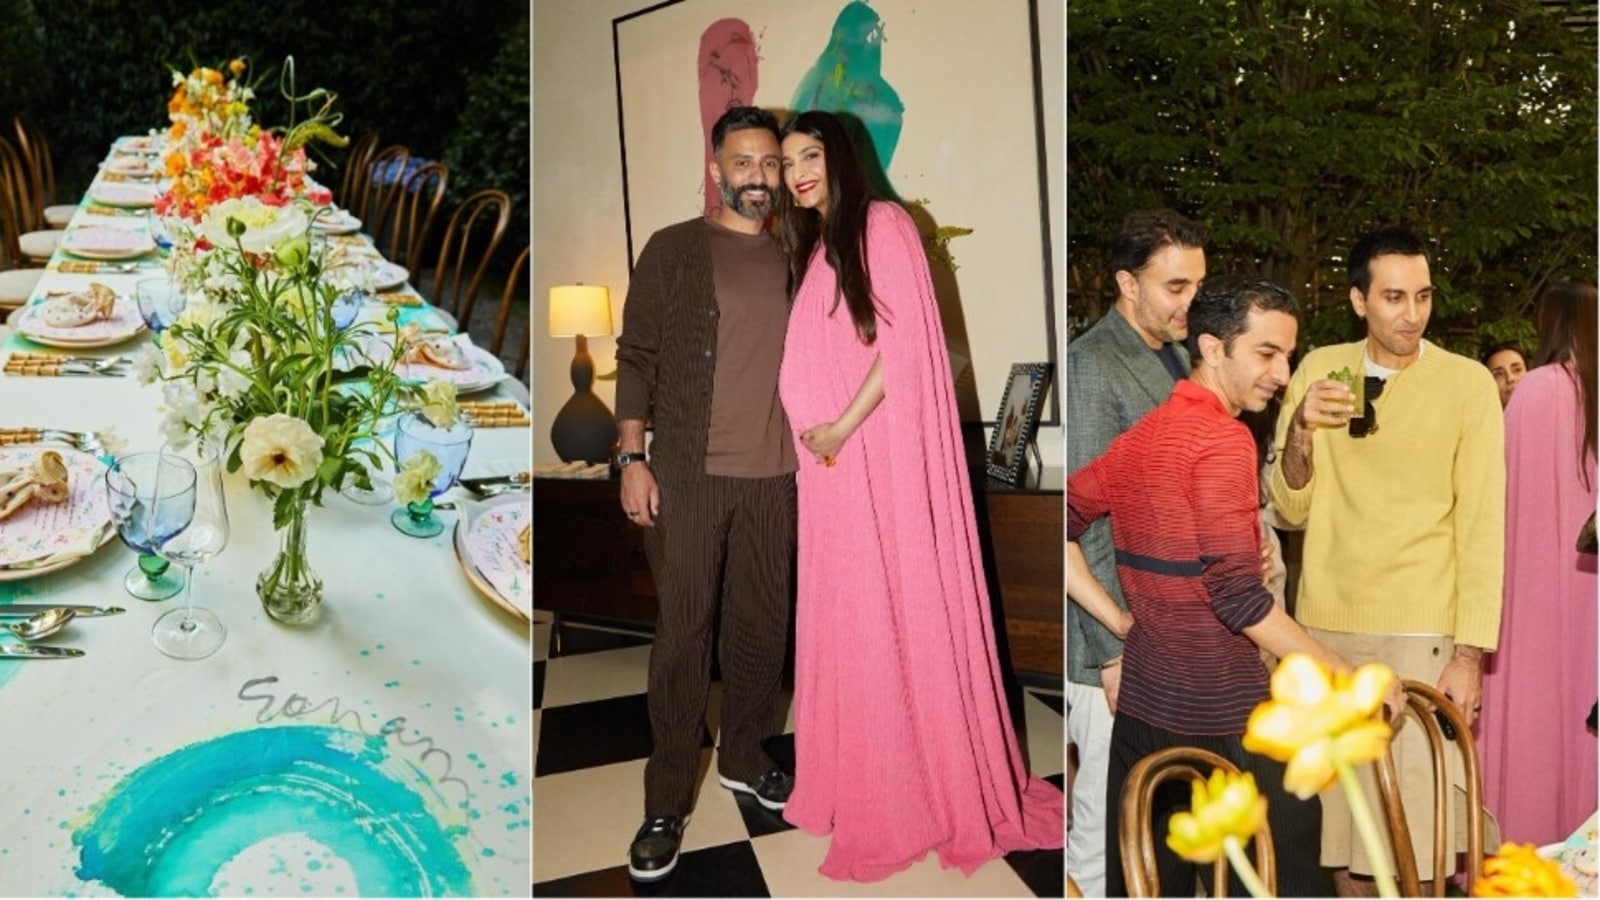 Sonam Kapoor shares unseen pics from her baby shower in London, says ‘it’s all starting to feel real’